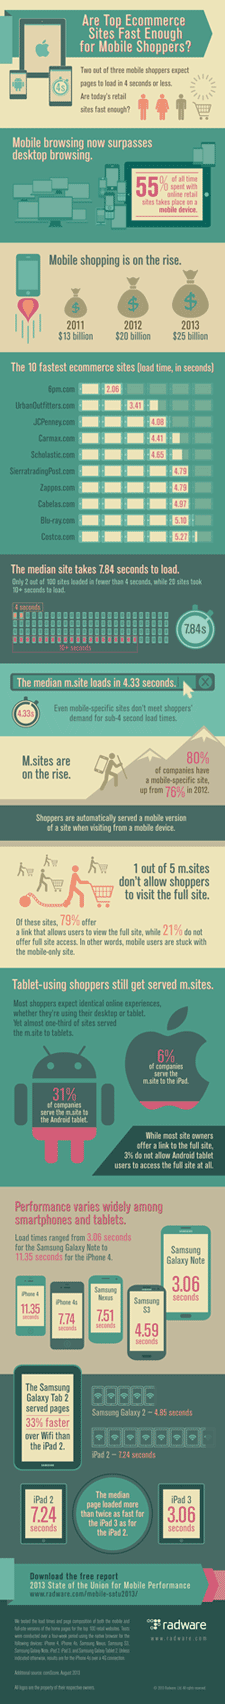 Infographic: Mobile Web Performance State of the Union 2013